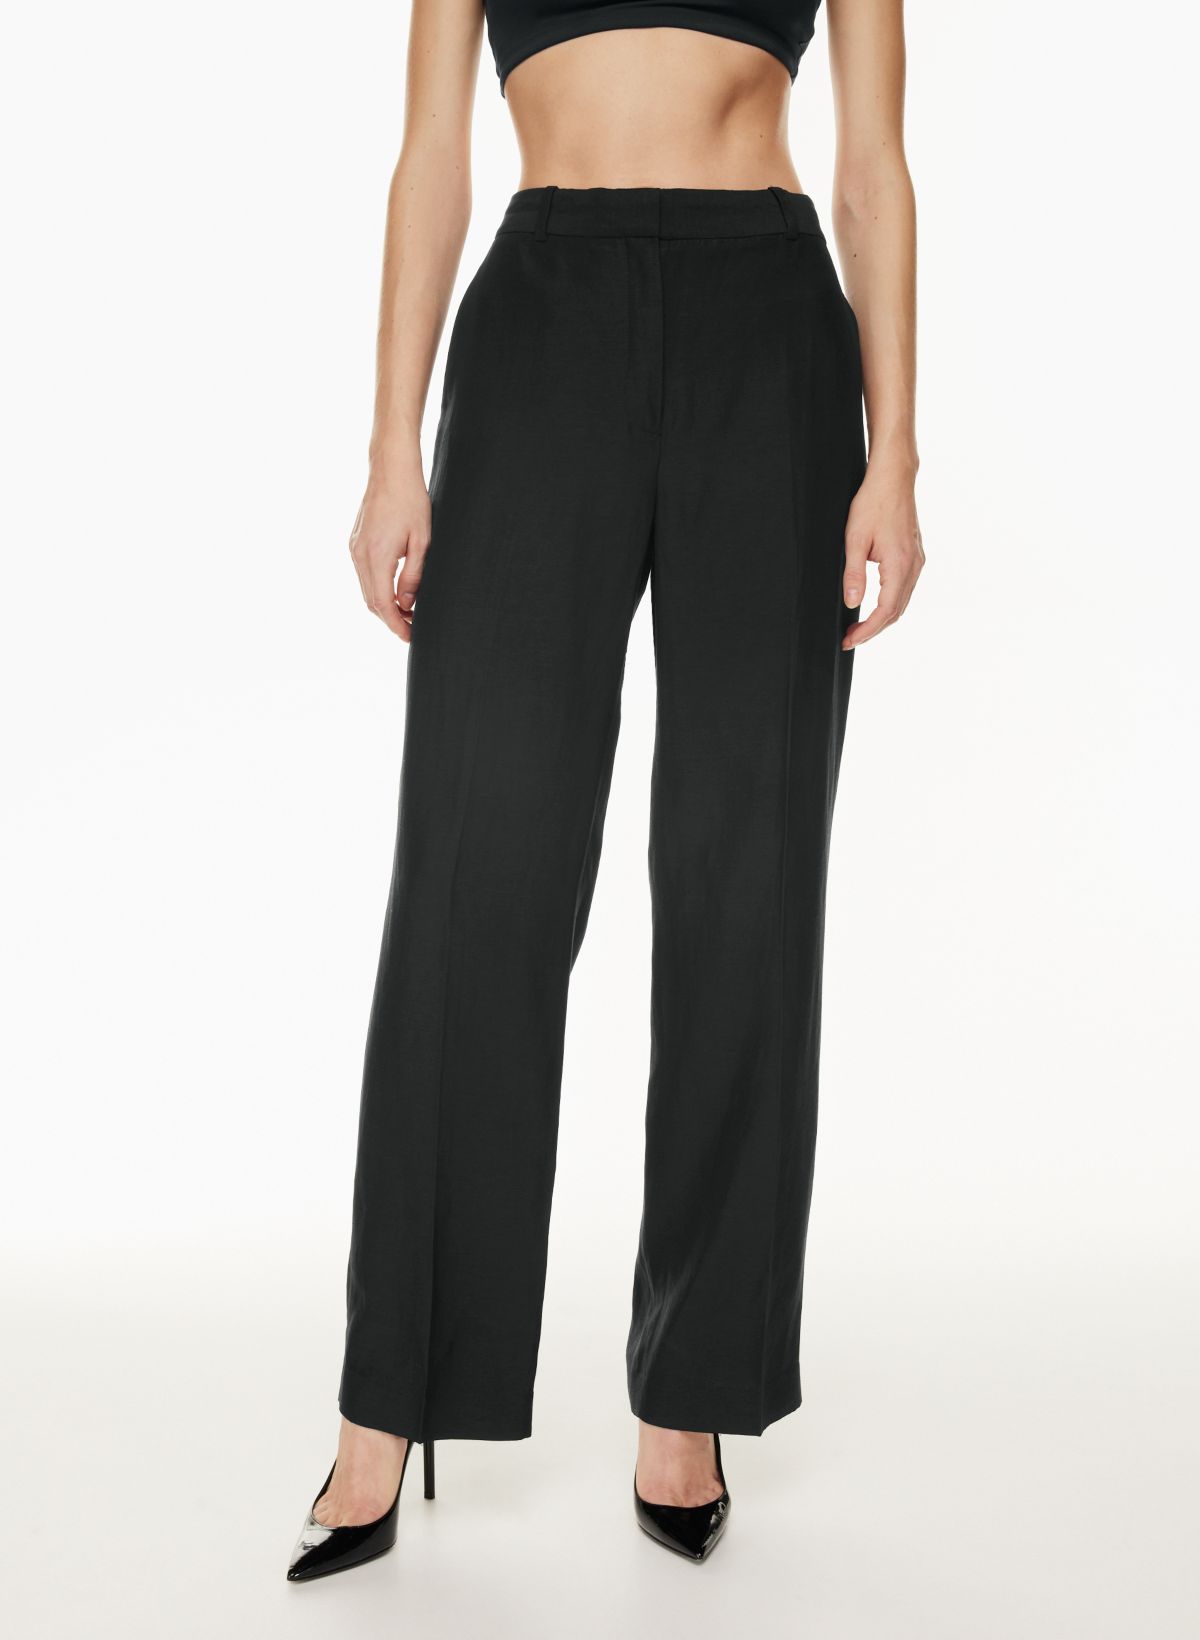 Fluid linen and viscose trousers, black Pants for Women